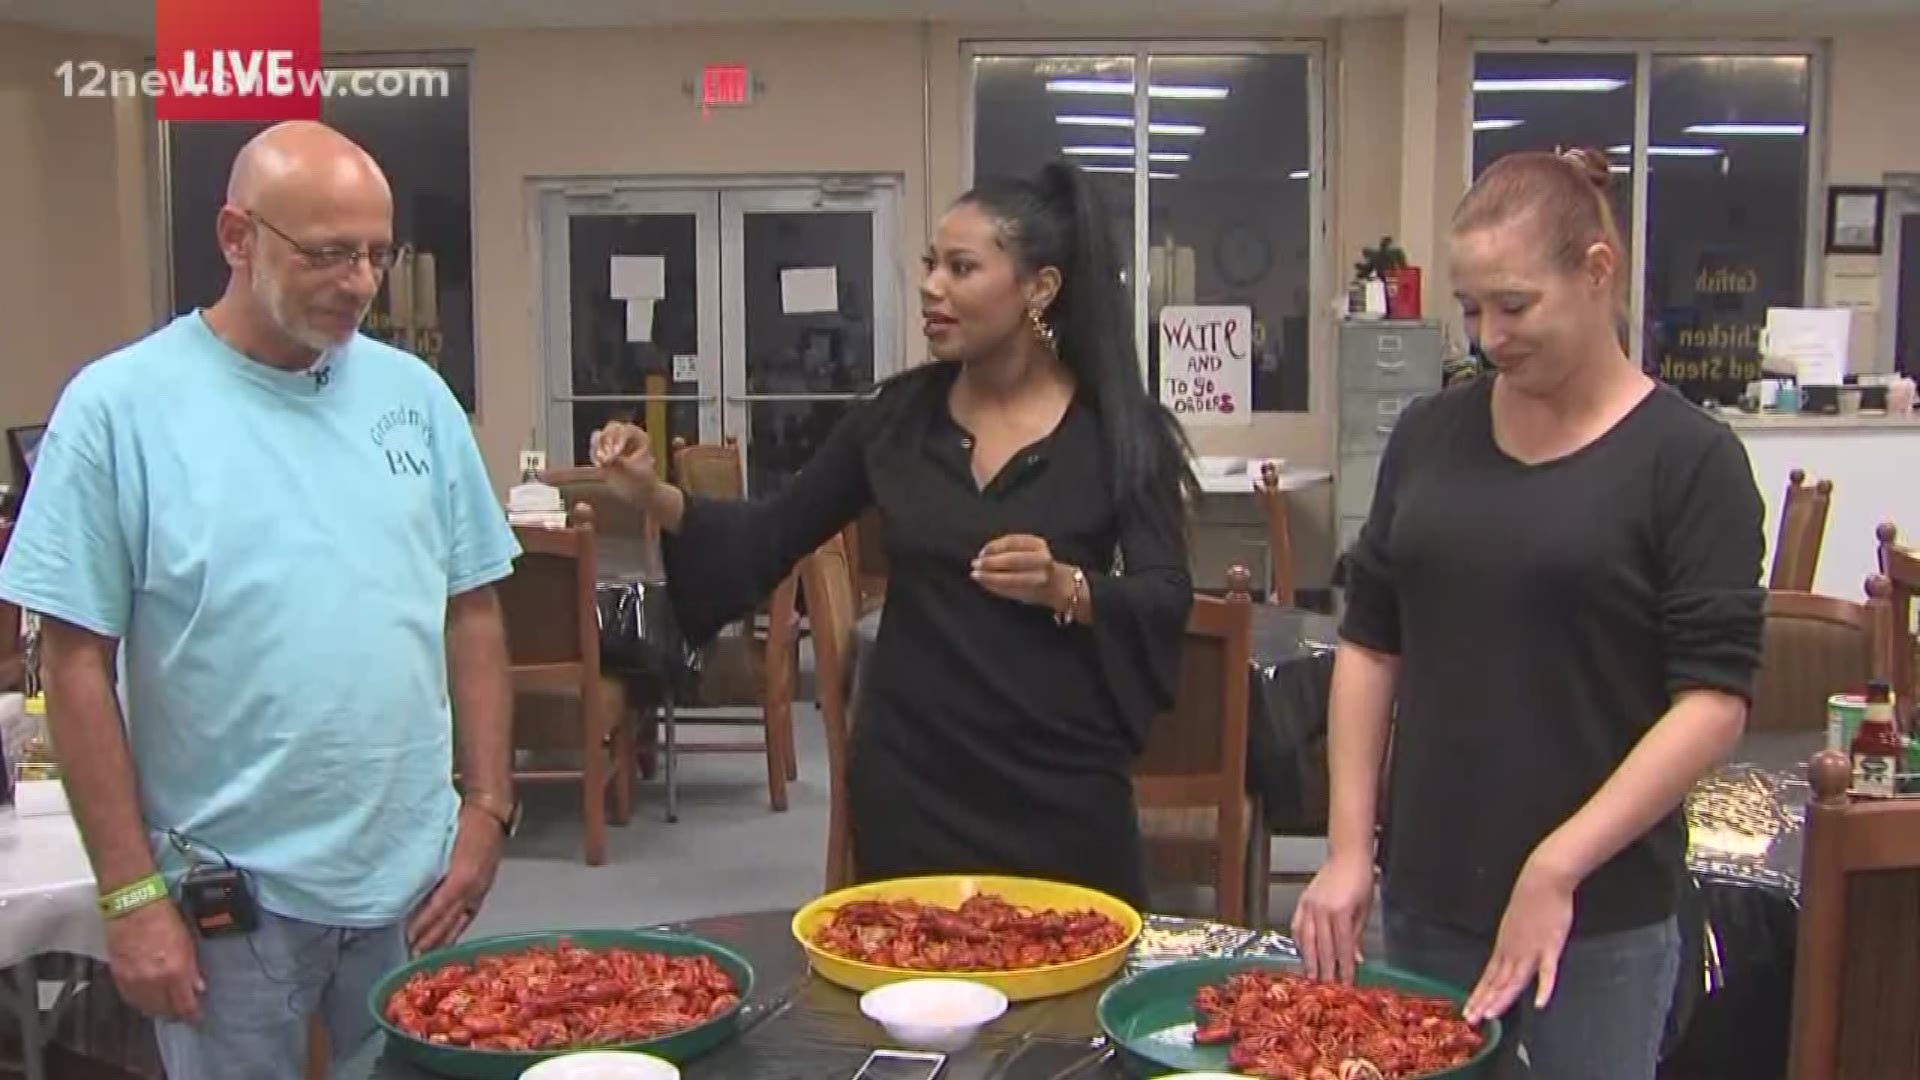 Our reporter tries to out-peel employees at Grandma's County Cooking in one minute race.